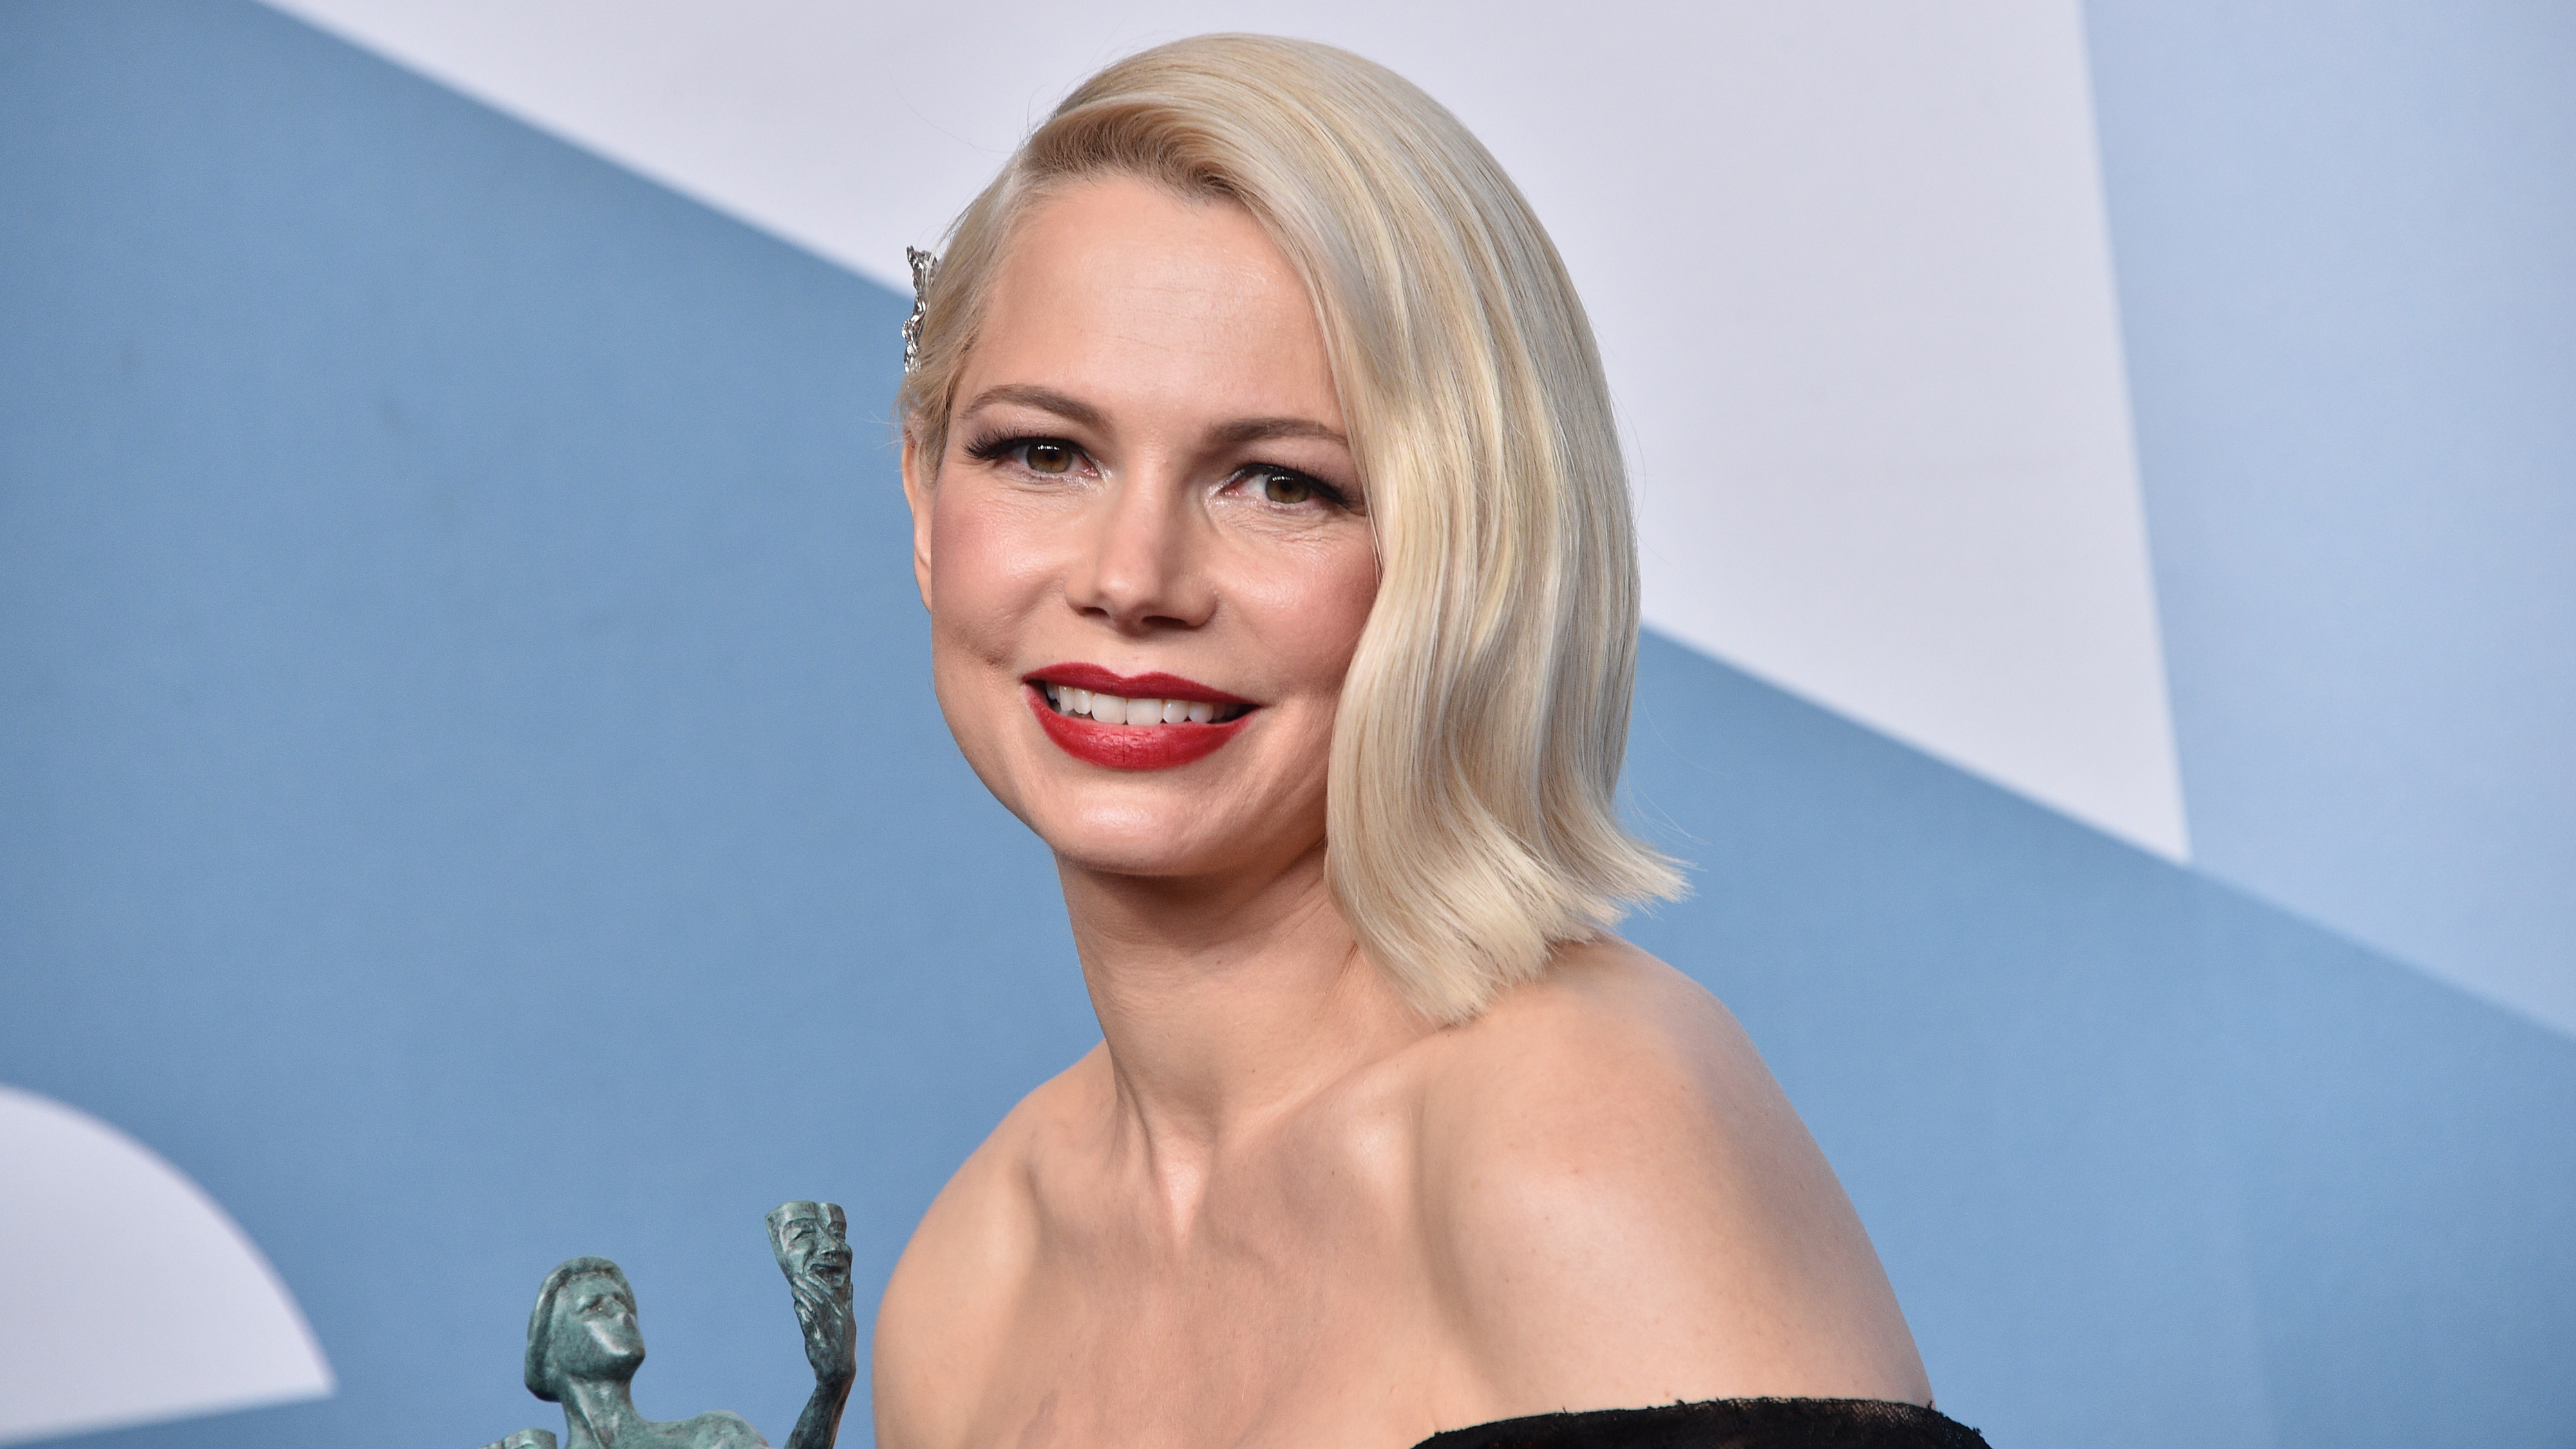 Michelle Williams On The Possibility Of A ‘Greatest Showman’ Sequel, Returning For ‘Venom 3’